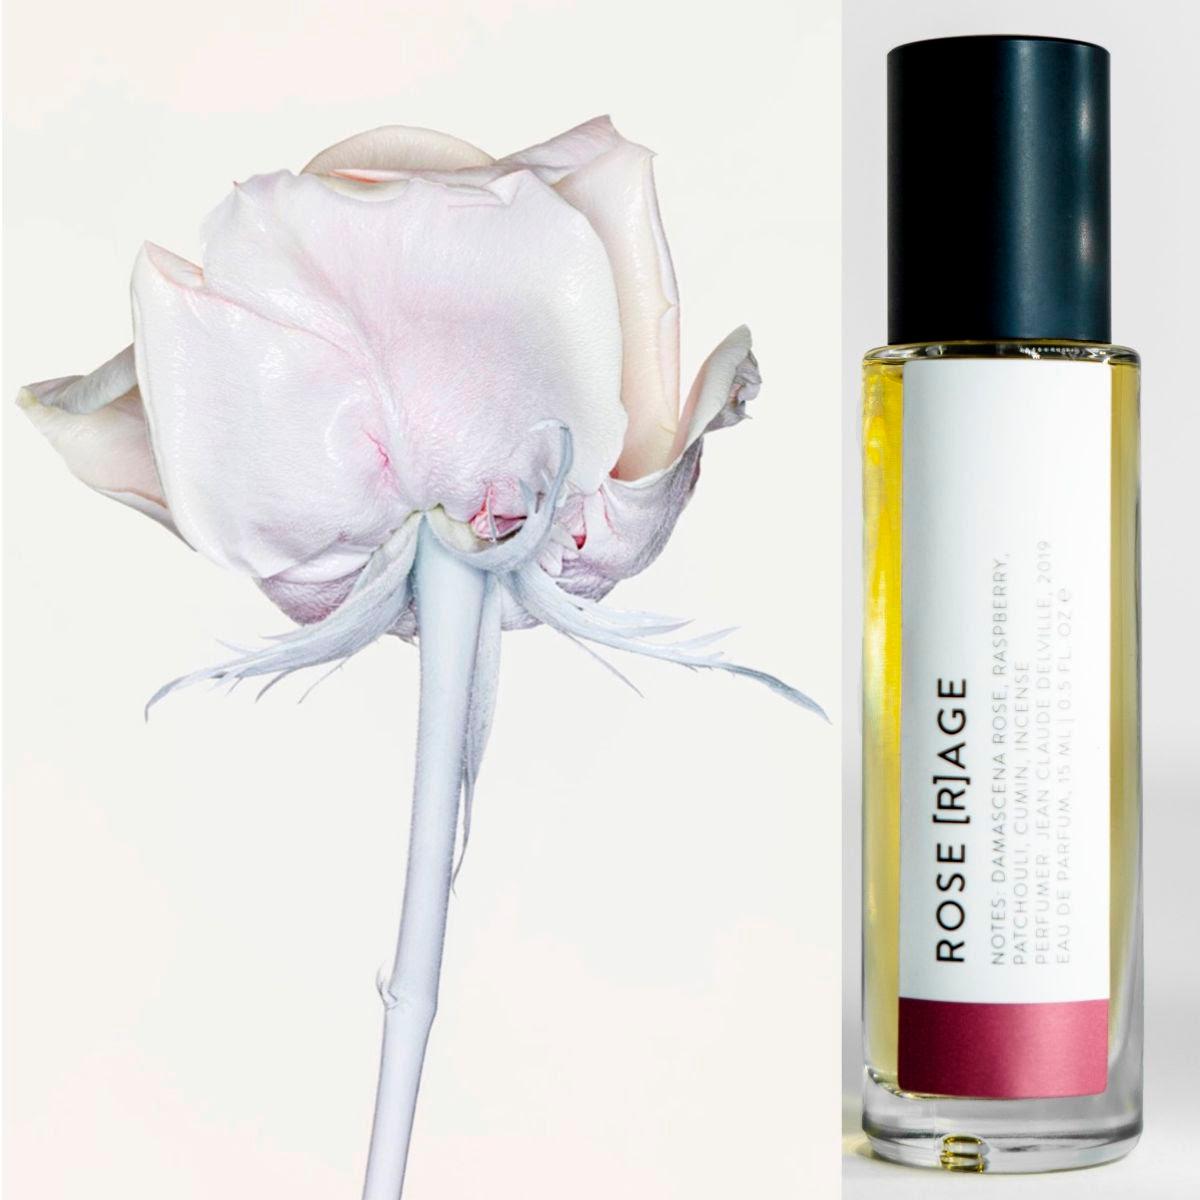 light pink rose with white stem by ben hasset, rose rage fragrance 